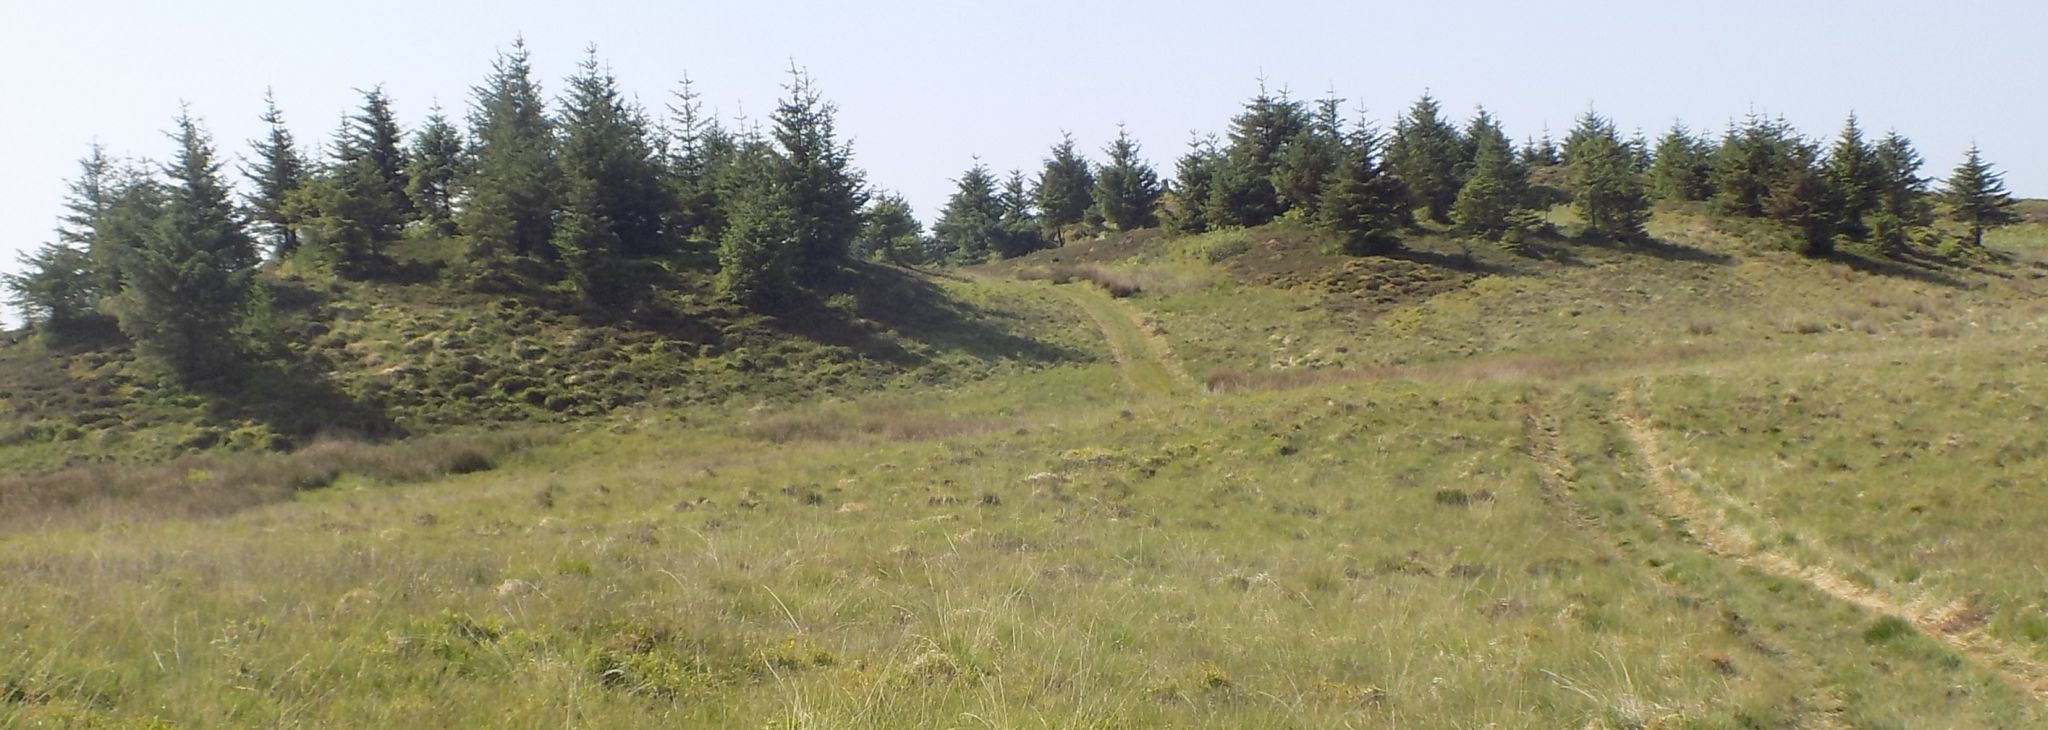 Approach to Broadfield Hill